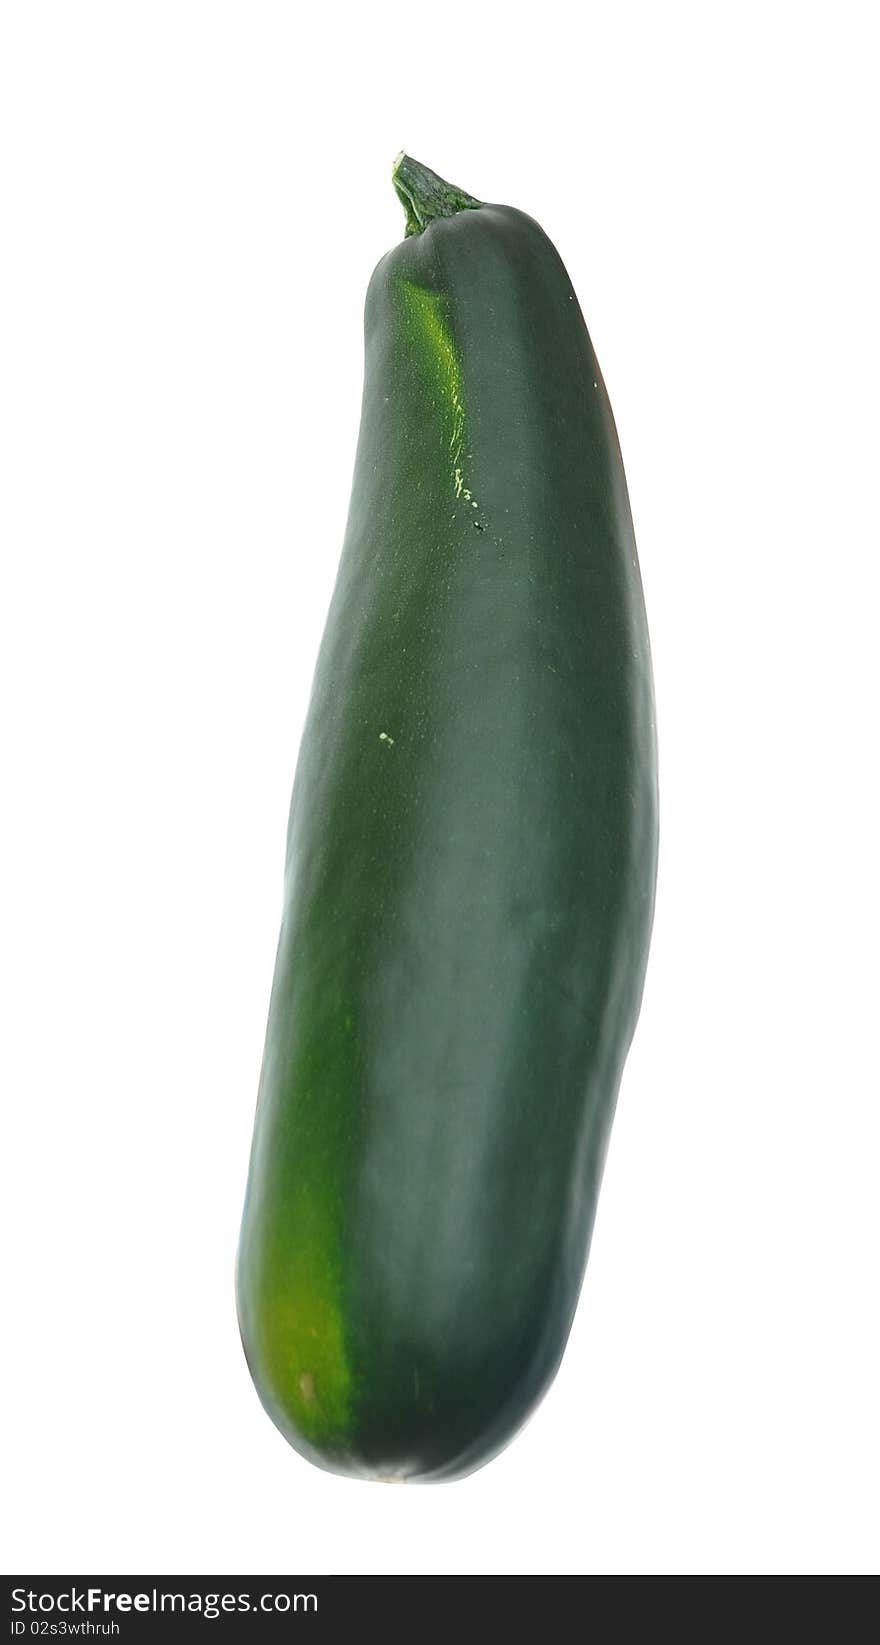 Large green zucchini vegetable plant isolated on white background. Large green zucchini vegetable plant isolated on white background